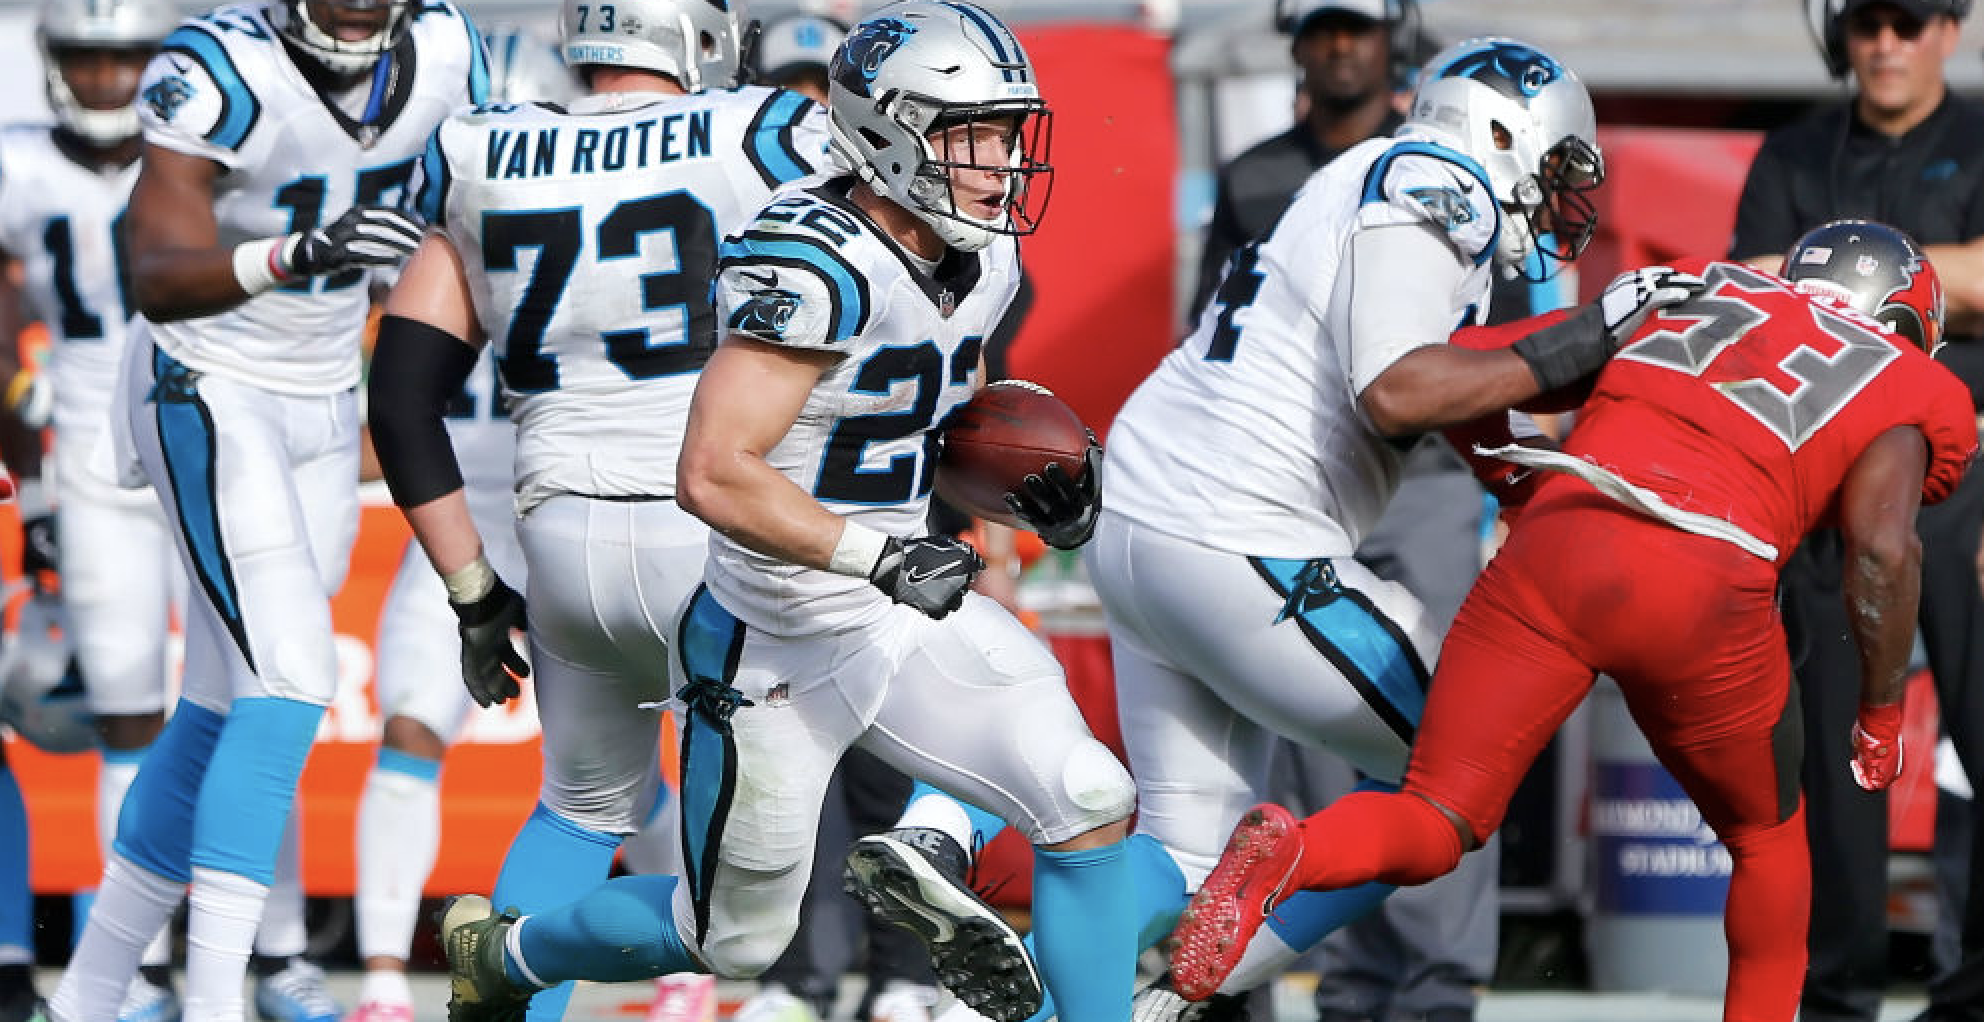 TAMPA, FL - DEC 02:  Christian McCaffrey (22) of the Panthers carries the ball during the regular season game between the Carolina Panthers and the Tampa Bay Buccaneers on December 02, 2018 at Raymond James Stadium in Tampa, Florida. (Photo by Cliff Welch/Icon Sportswire via Getty Images)